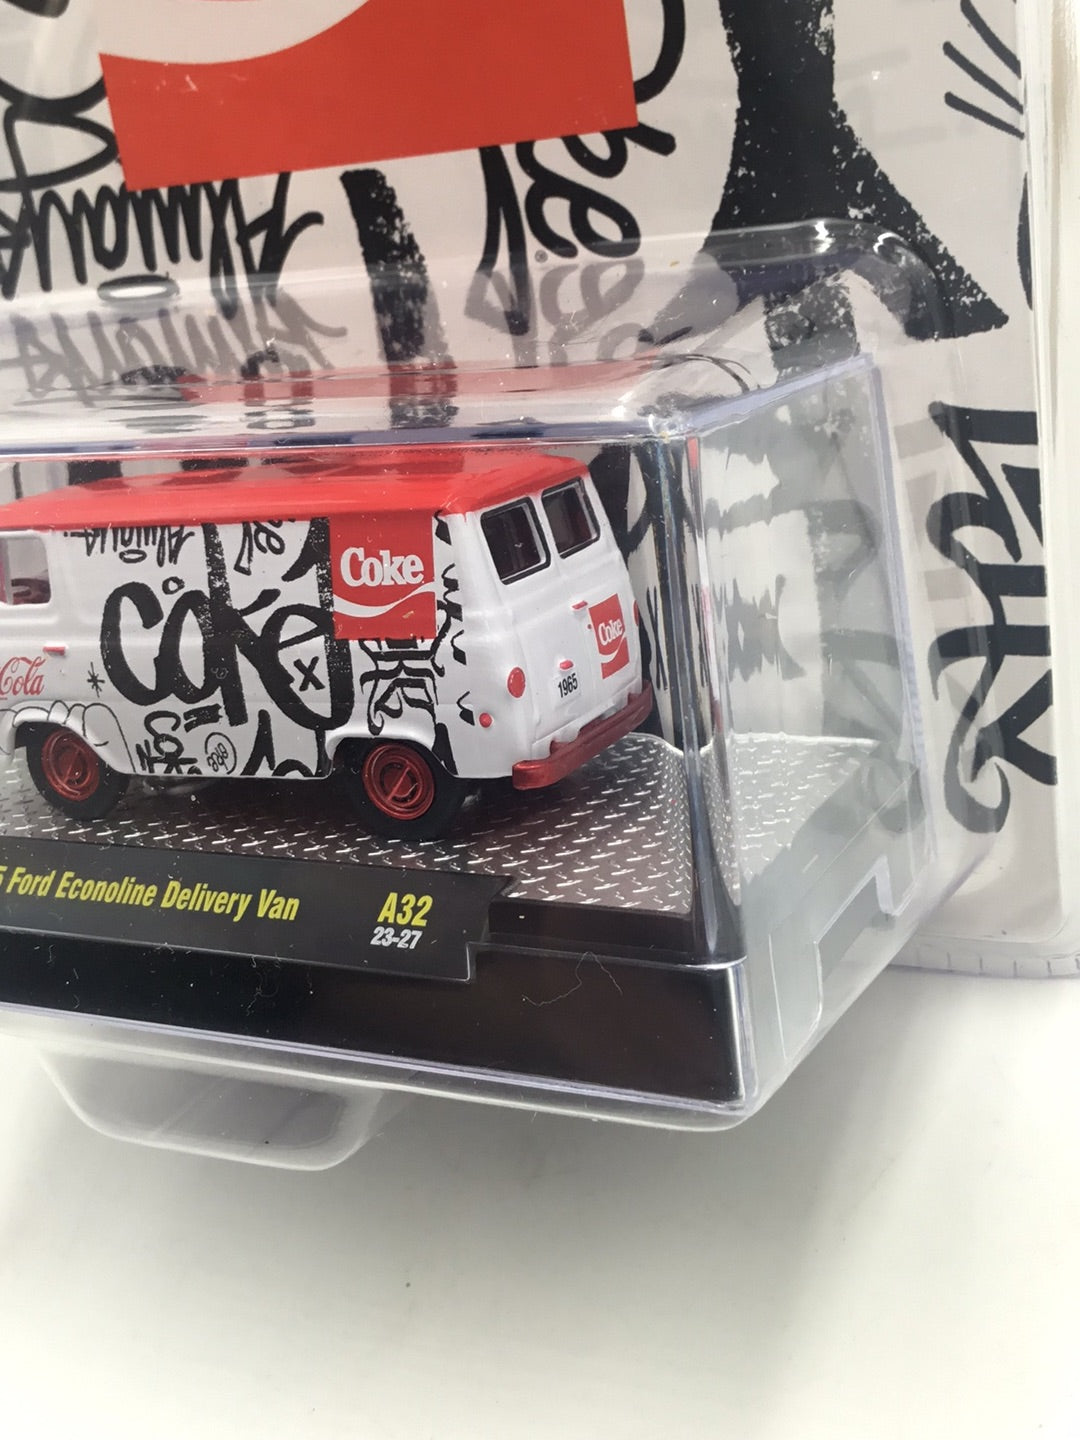 M2 Machines Coca Cola 1965 Ford Econoline Delivery Van CHASE A32